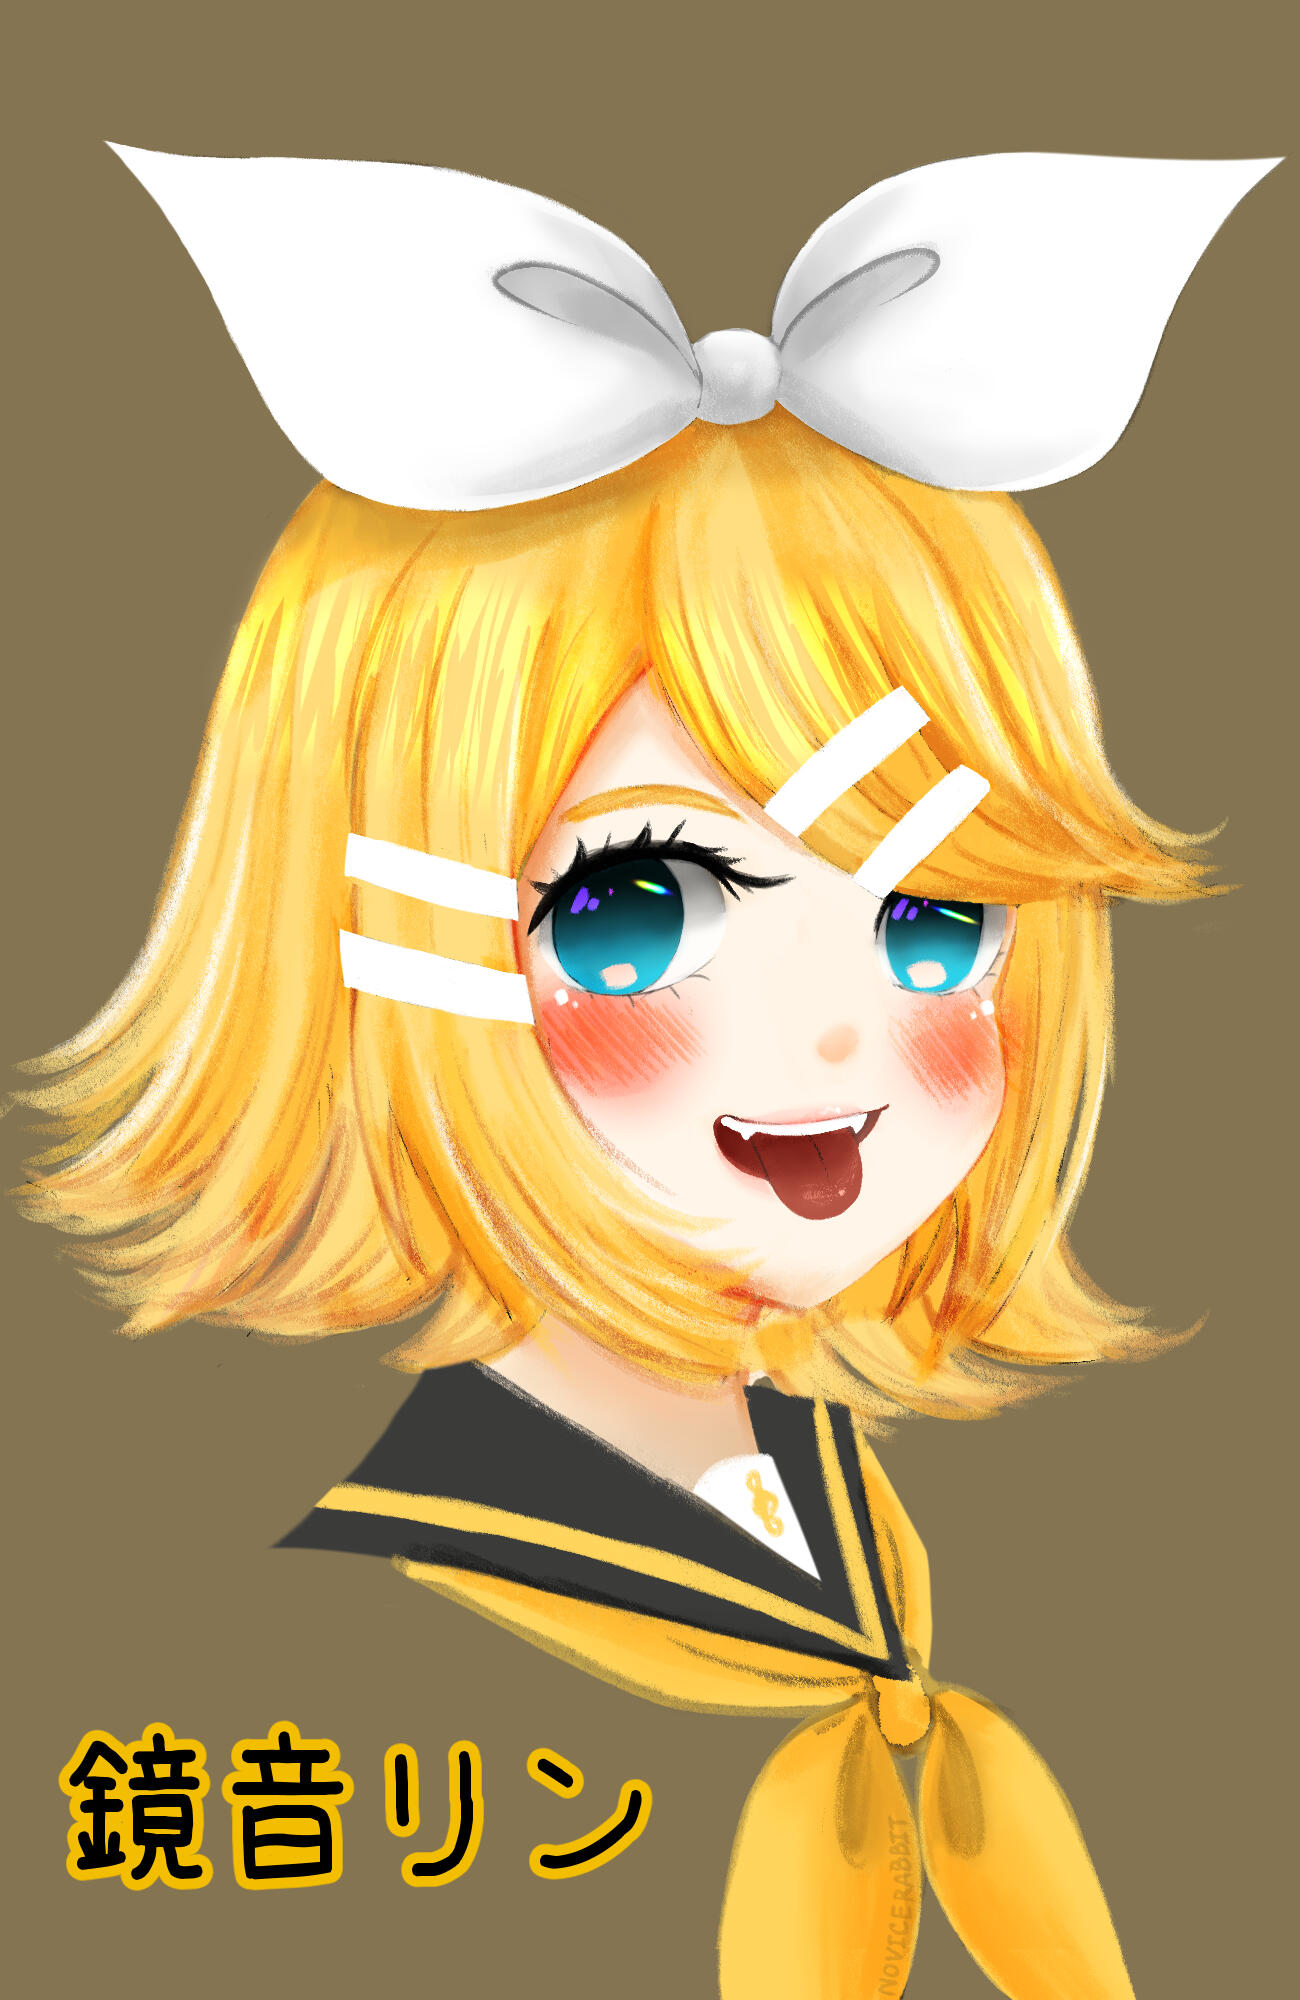 Kagamine Rin from VOCALOID